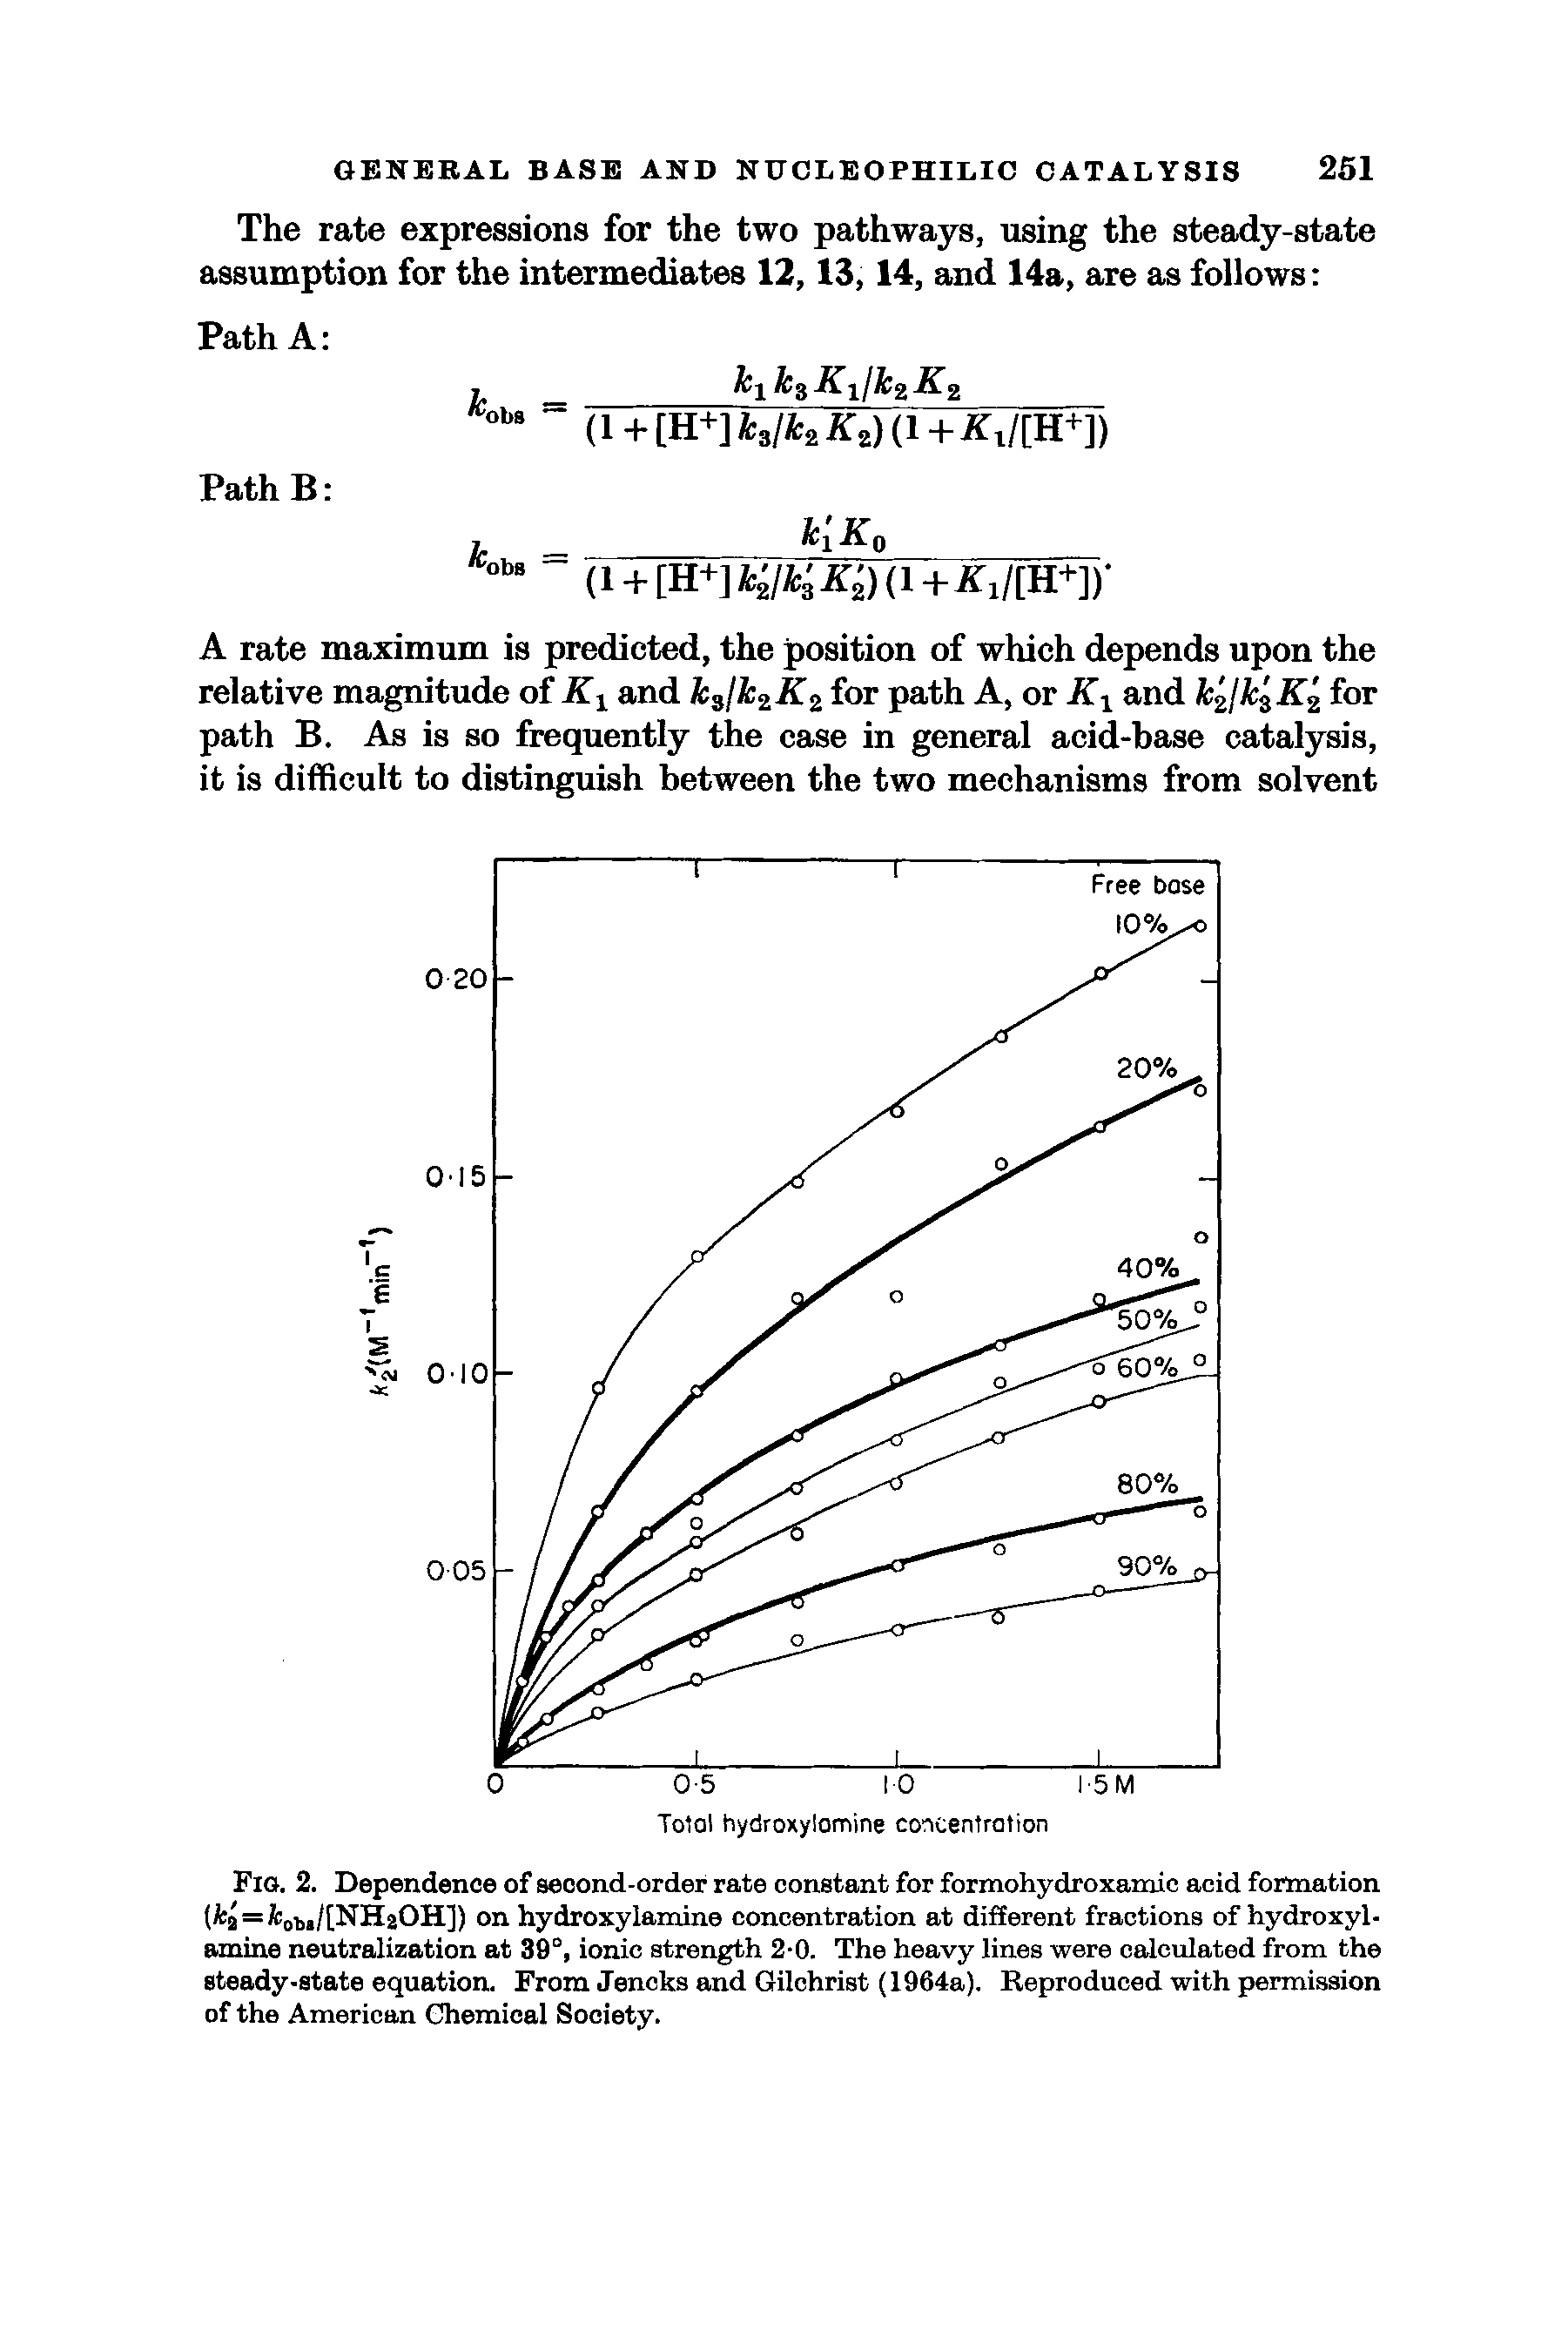 Fig. 2. Dependence of second-order rate constant for formohydroxamic acid formation (fca = fcoi,i/[NHaOH]) on hydroxylamine concentration at different fractions of hydroxyl-amine neutralization at 39°, ionic strength 2-0. The heavy lines were calculated from the steady-state equation. From Jencks and Gilchrist (1964a). Reproduced with permission of the American Chemical Society.